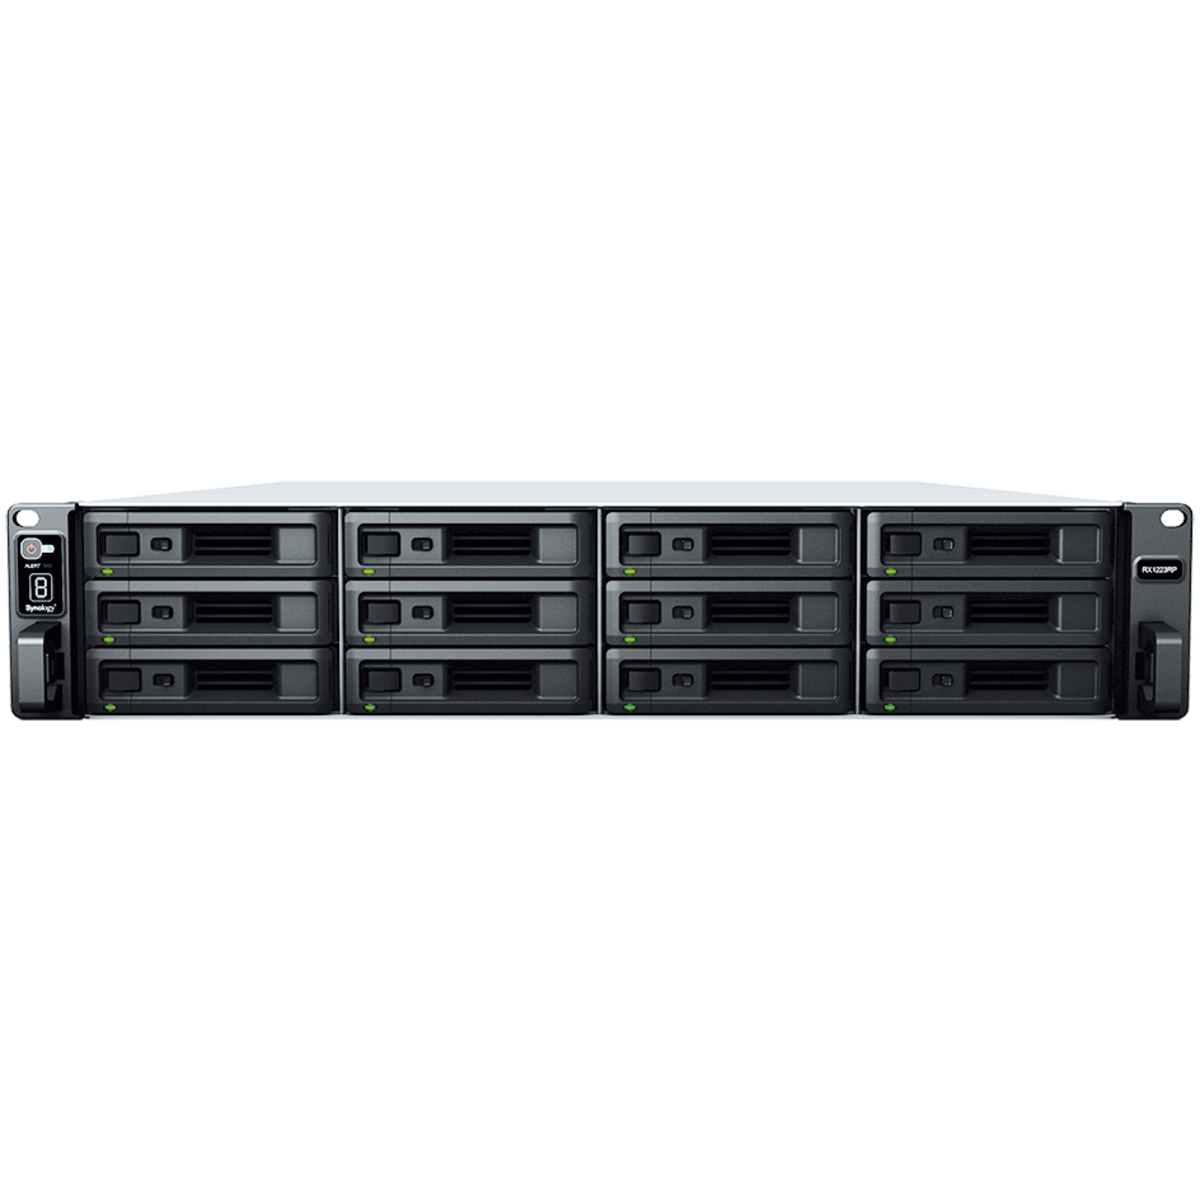 Synology RX1223RP External Expansion Drive 88tb 12-Bay RackMount Large Business / Enterprise Expansion Enclosure 11x8tb Seagate BarraCuda ST8000DM004 3.5 5400rpm SATA 6Gb/s HDD CONSUMER Class Drives Installed - Burn-In Tested RX1223RP External Expansion Drive